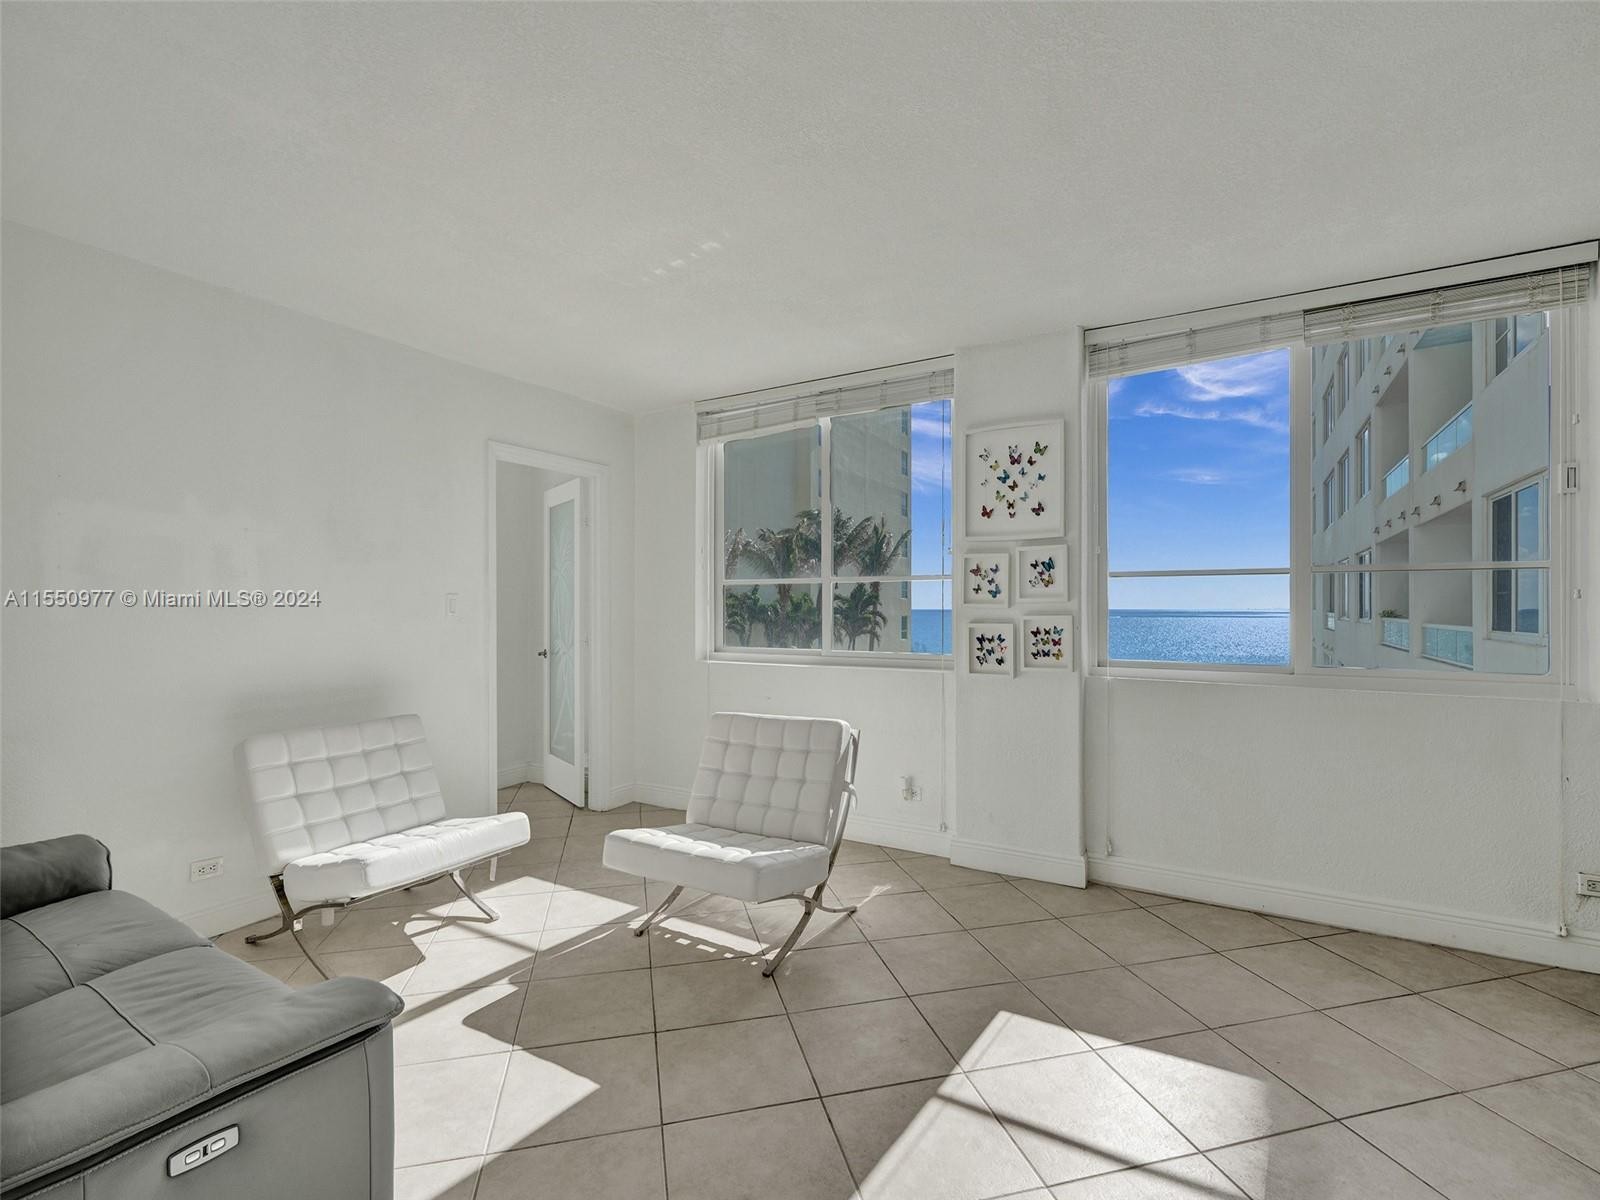 5. 5005 Collins Ave